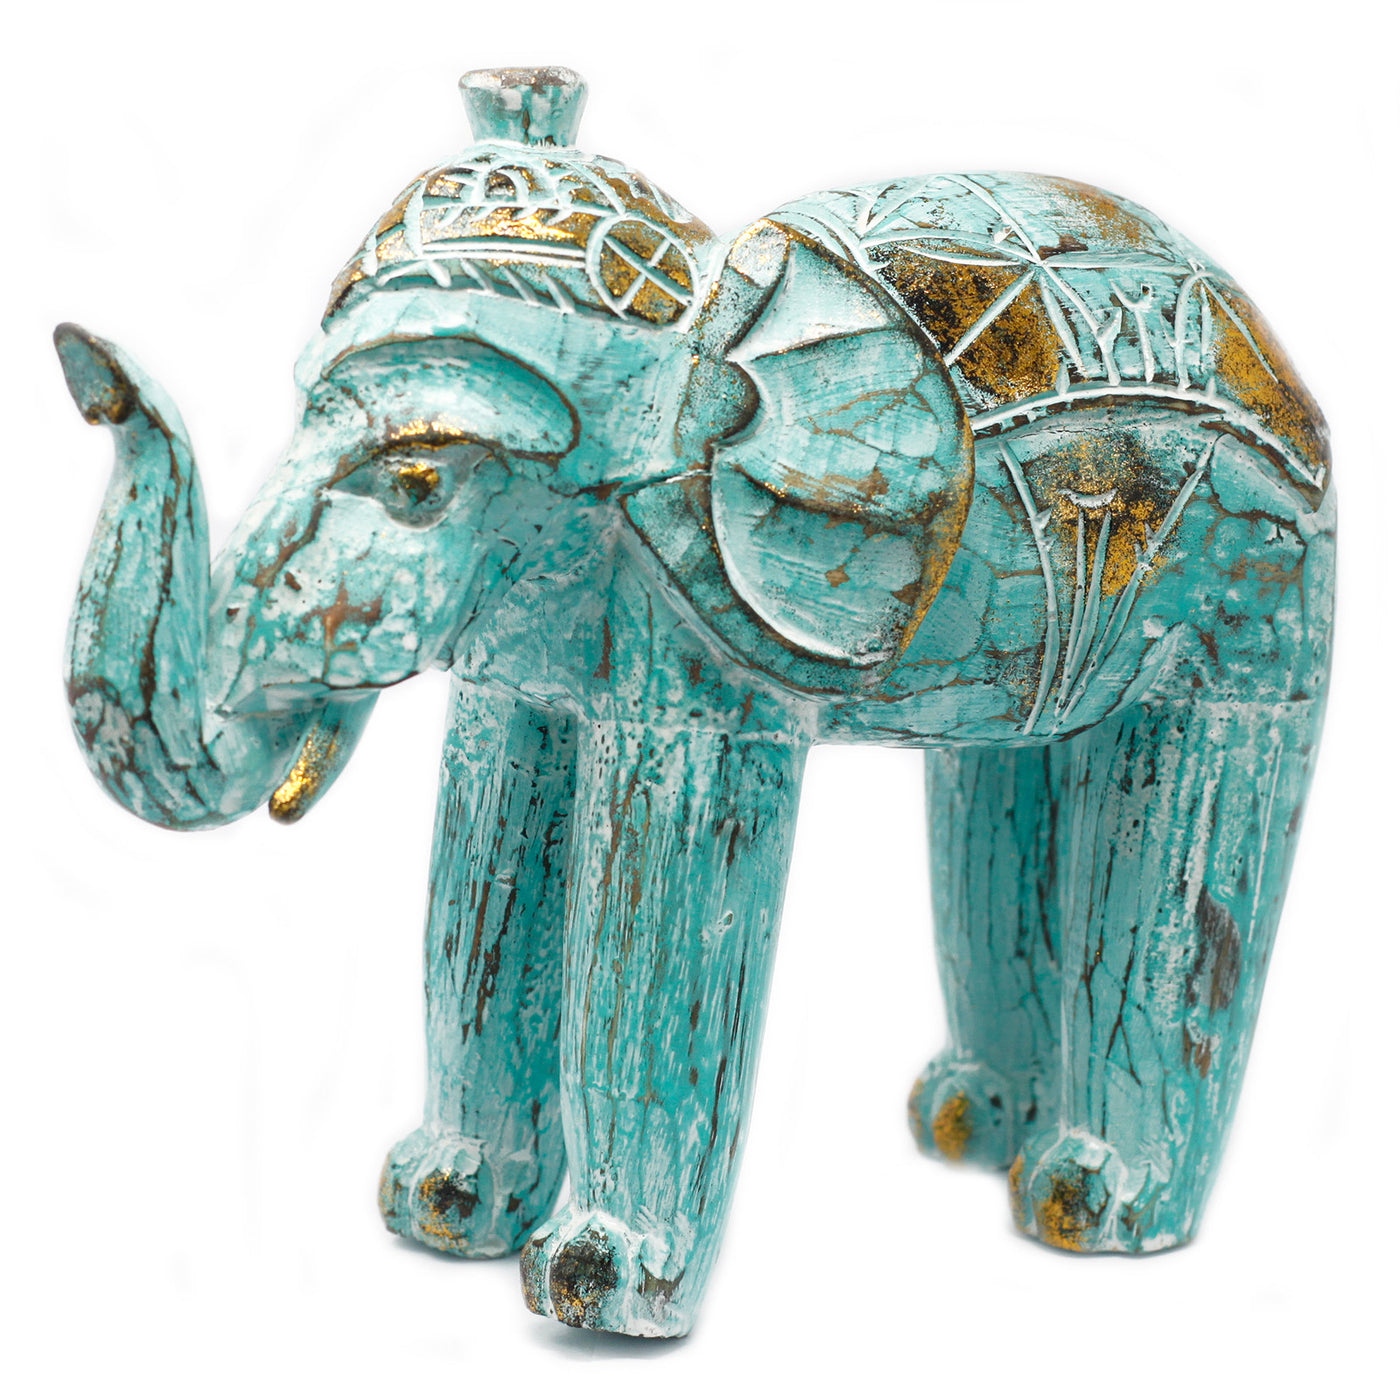 Wood Hand Carved Elephant Ornament - Turquoise Gold.